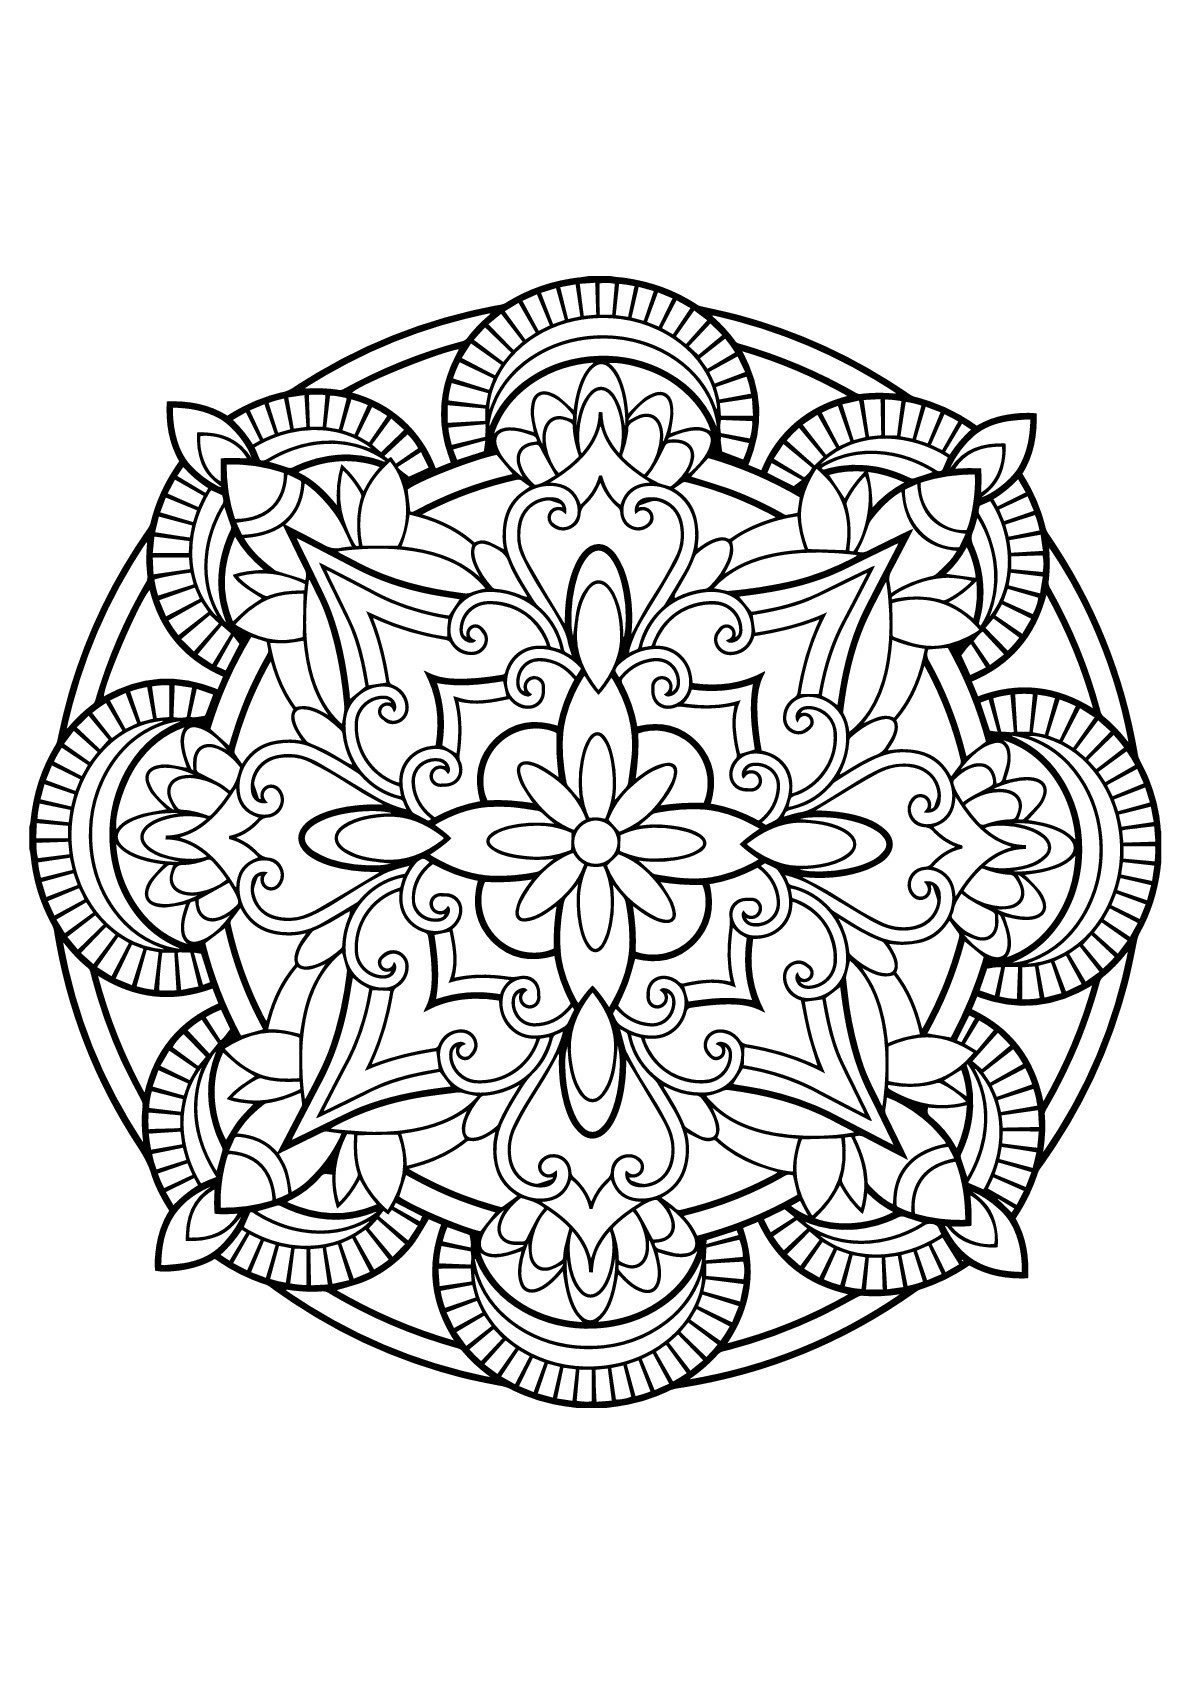 Best ideas about Mandela Adult Coloring Books
. Save or Pin Mandala from free coloring books for adults 23 M&alas Now.